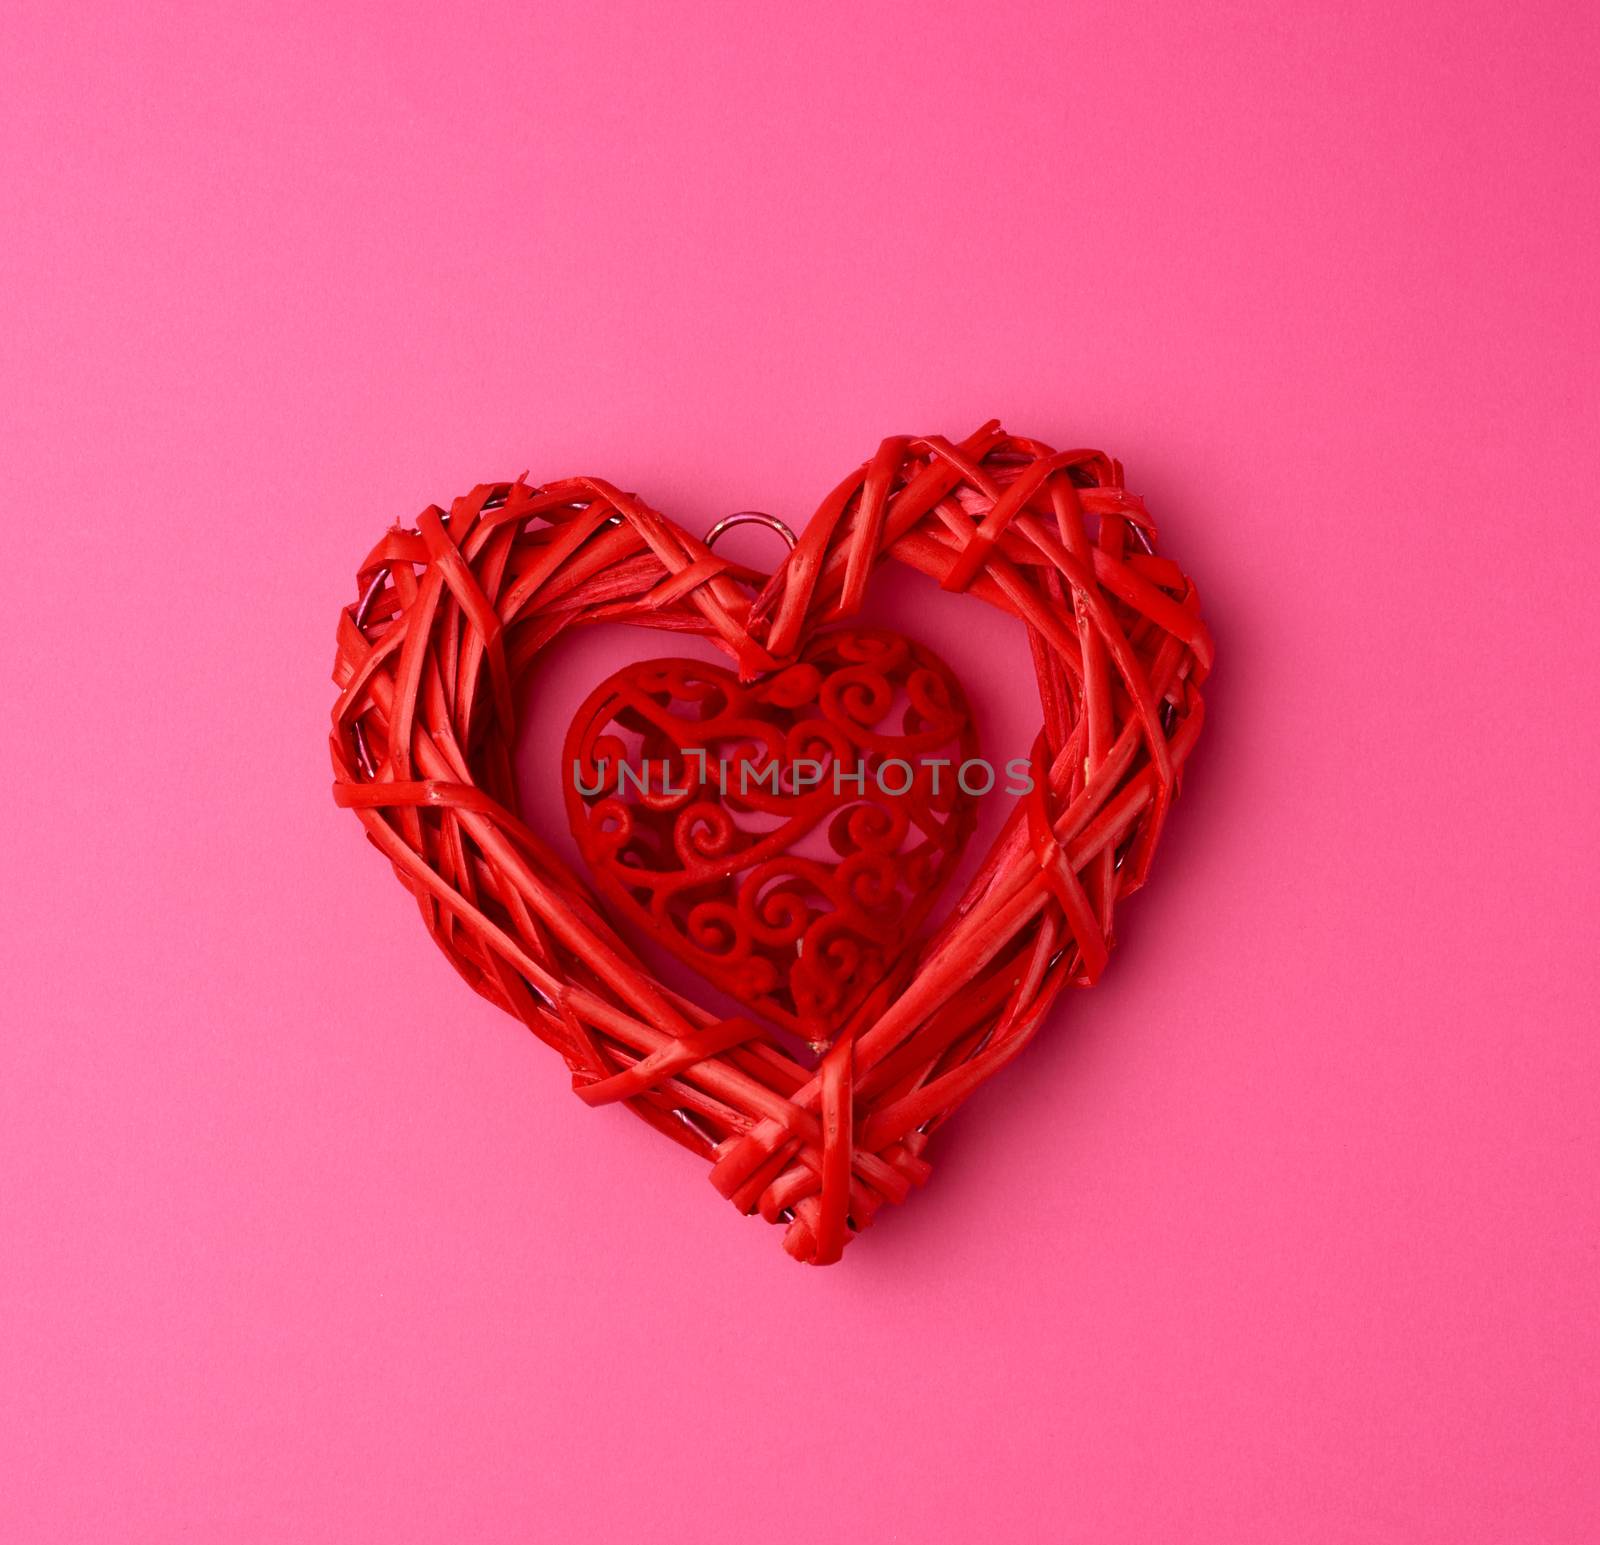 red wicker decorative heart on a pink background by ndanko